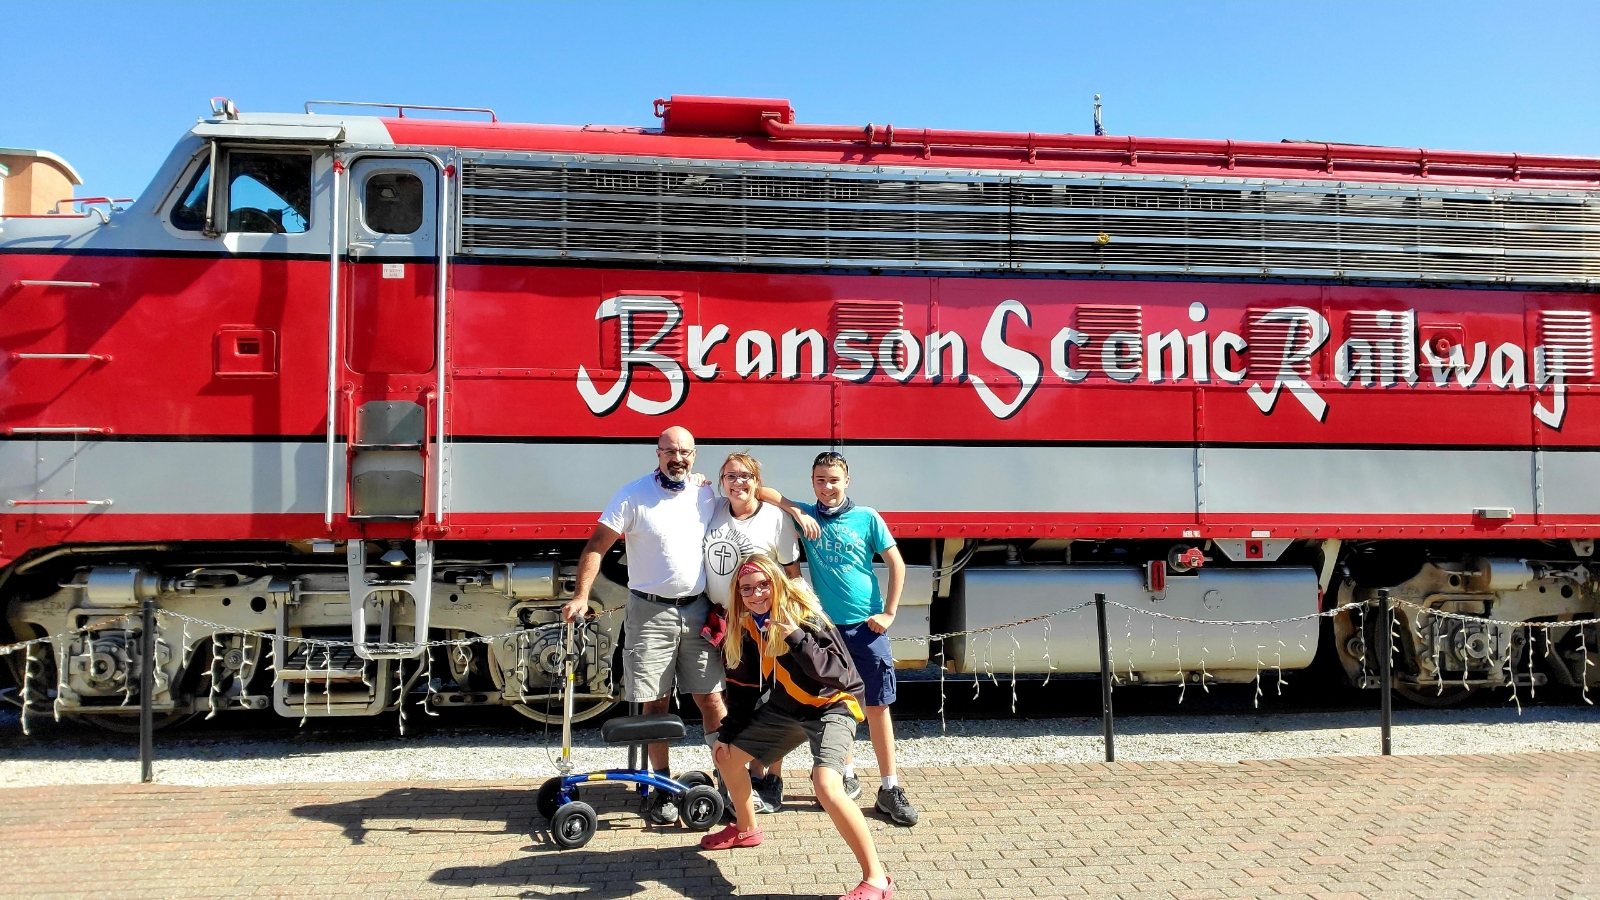 In front of a picturesque train, a father with a beaming smile poses proudly with his three children, all gathered around his knee scooter. The father, equipped with his mobility aid, exudes strength and love as he embraces his kids. Each child wears a joyful expression, radiating happiness and a sense of togetherness. The train, a symbol of adventure and journey, adds a touch of excitement to the background. This heartwarming scene captures the bond between a caring father and his playful, adoring children, as they create lasting memories together.